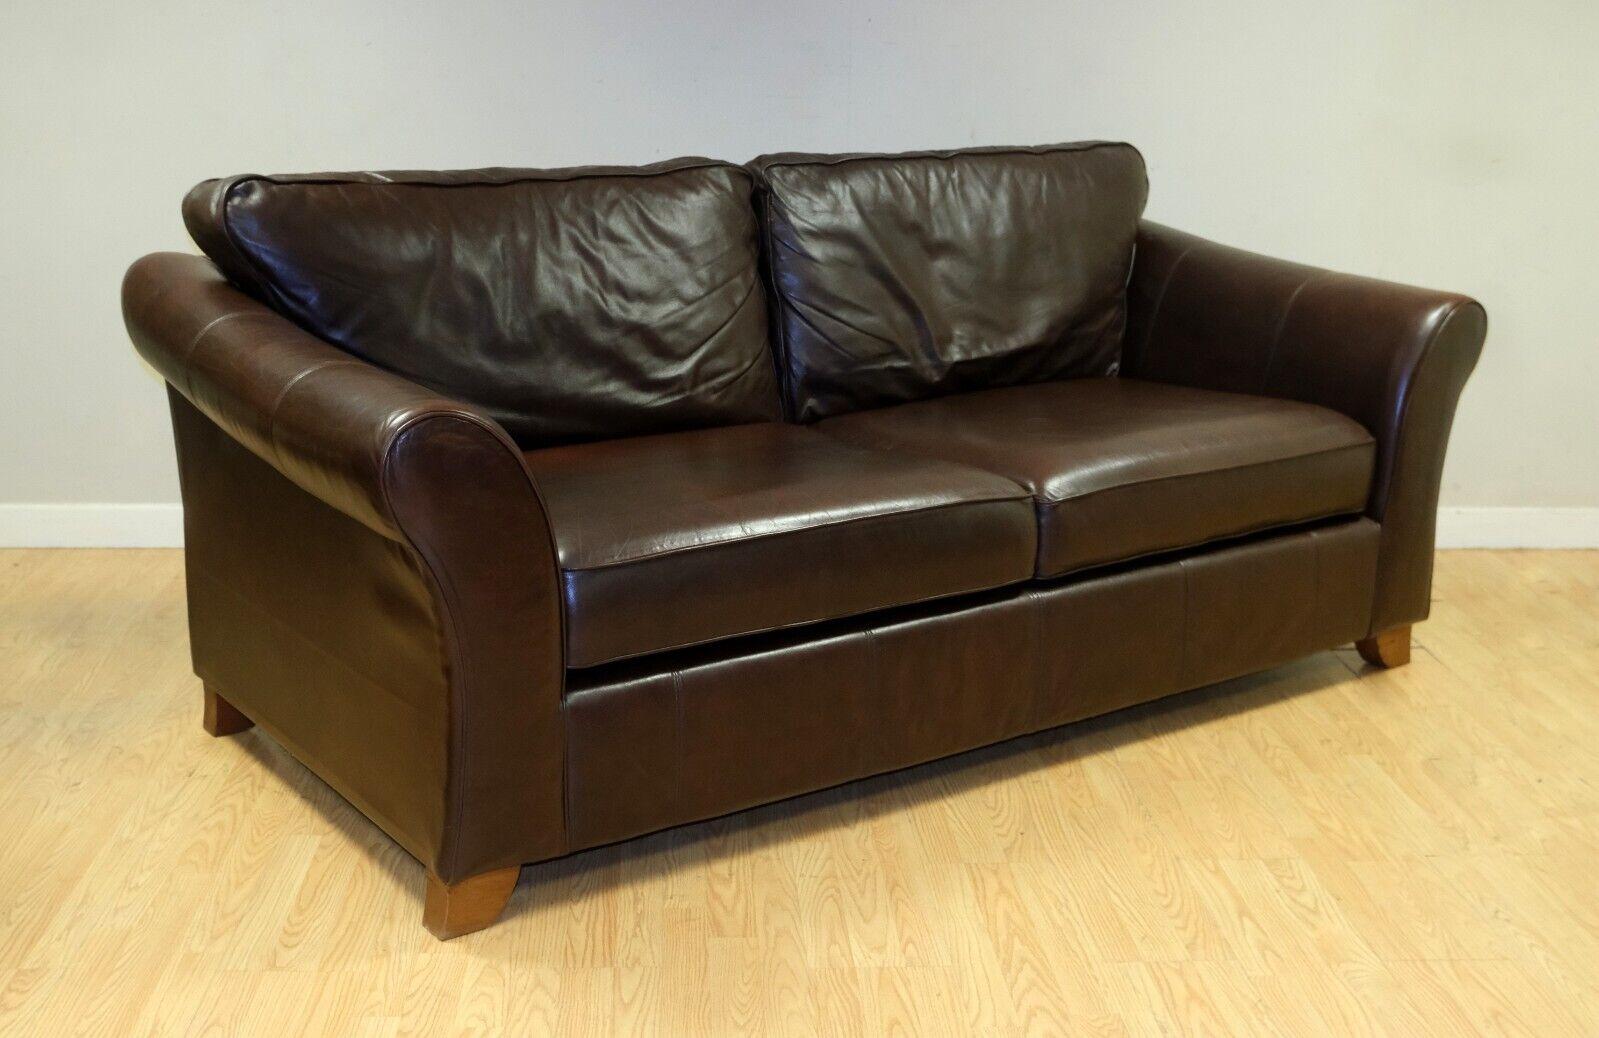 Lovely Marks & Spencers Abbey Brown Leather Two Seater Sofa auf Holzfüßen (Land) im Angebot